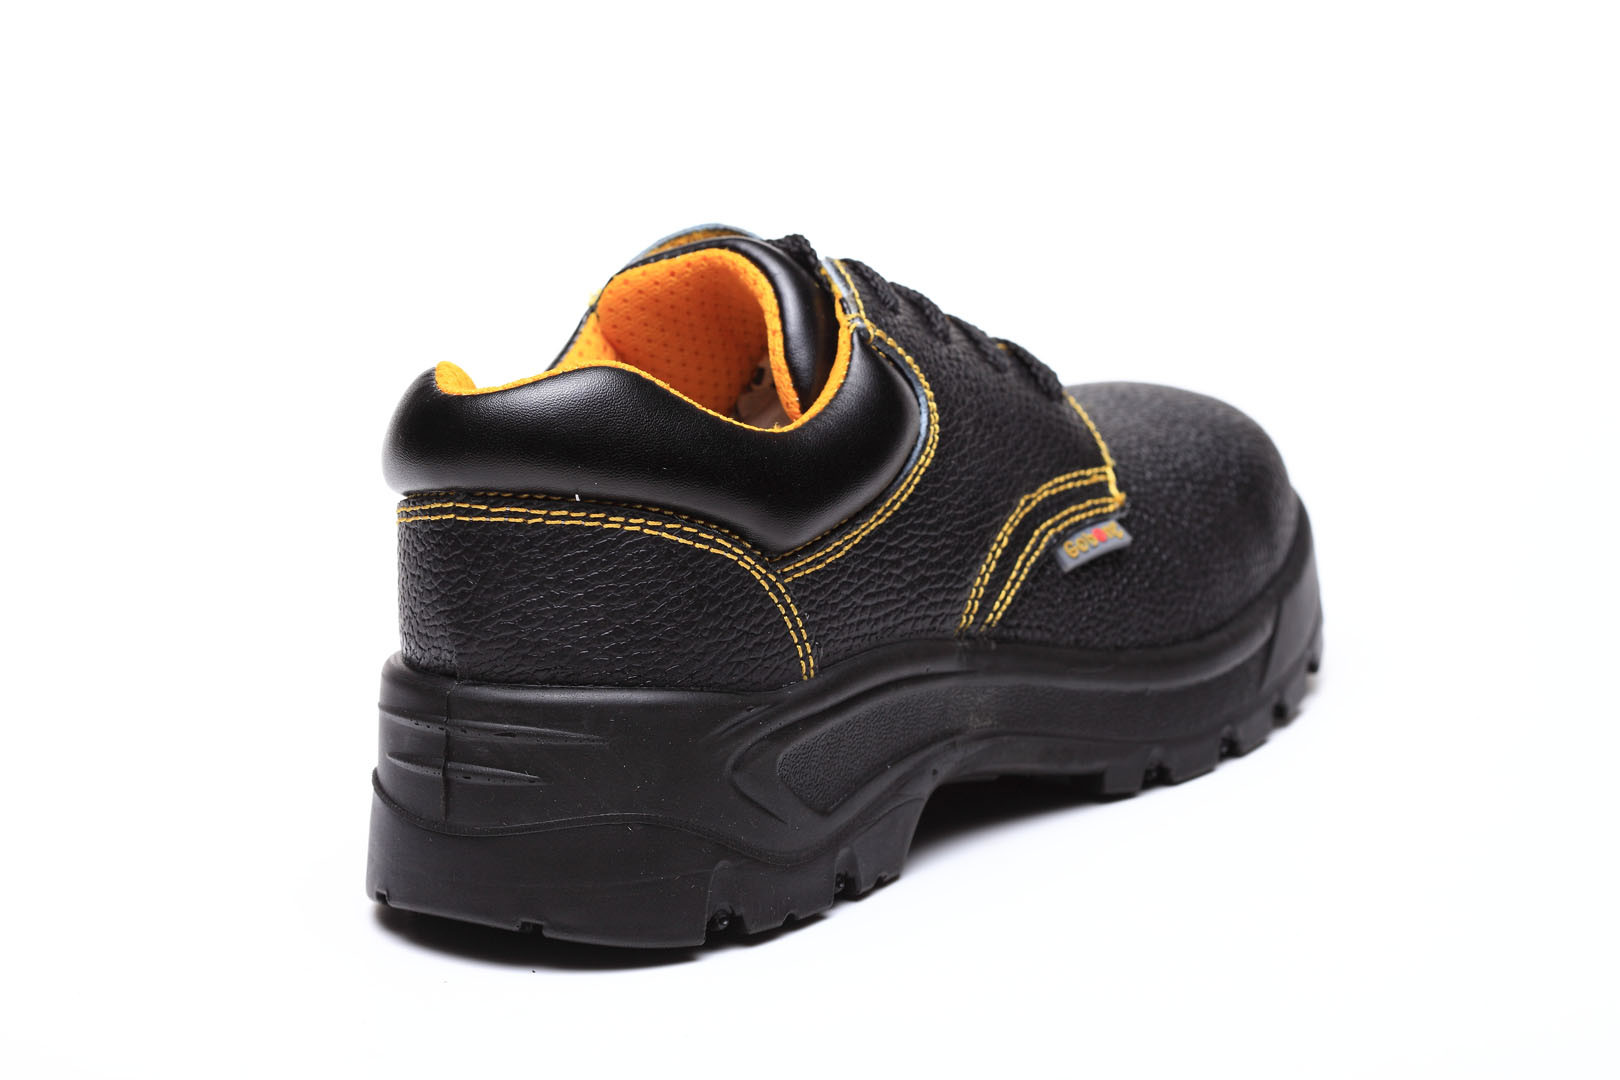 Safety Protection Industrial Working Mining Safety Shoes with Steel Toe